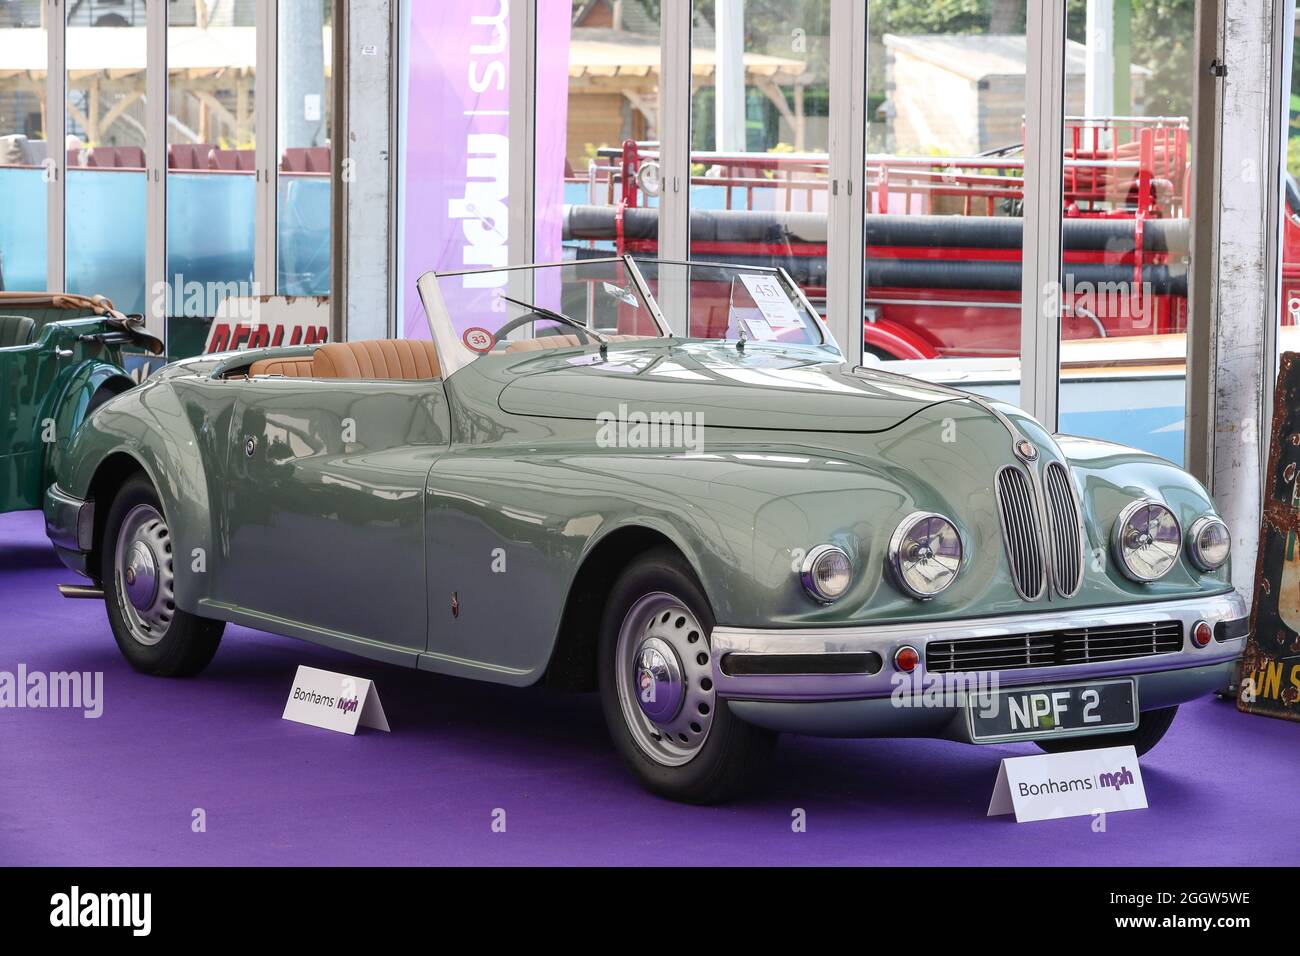 Beaulieu, Hampshire, UK 3rd September 2021. A rare 1949 Bristol 402 Drophead Coupé formally owned by Hollywood actress Jean Simmons, which is to be offered at auction at the Bonhams MPH Beaulieu Sale this Sunday, with an estimate of £150,000 – 200,000. One of the most glamorous luxury motor cars of its day, the Bristol was bought new for the Hollywood actress by her future husband and fellow star Stewart Granger as one of a matching pair. Credit: Stuart Martin/Alamy Live News Stock Photo